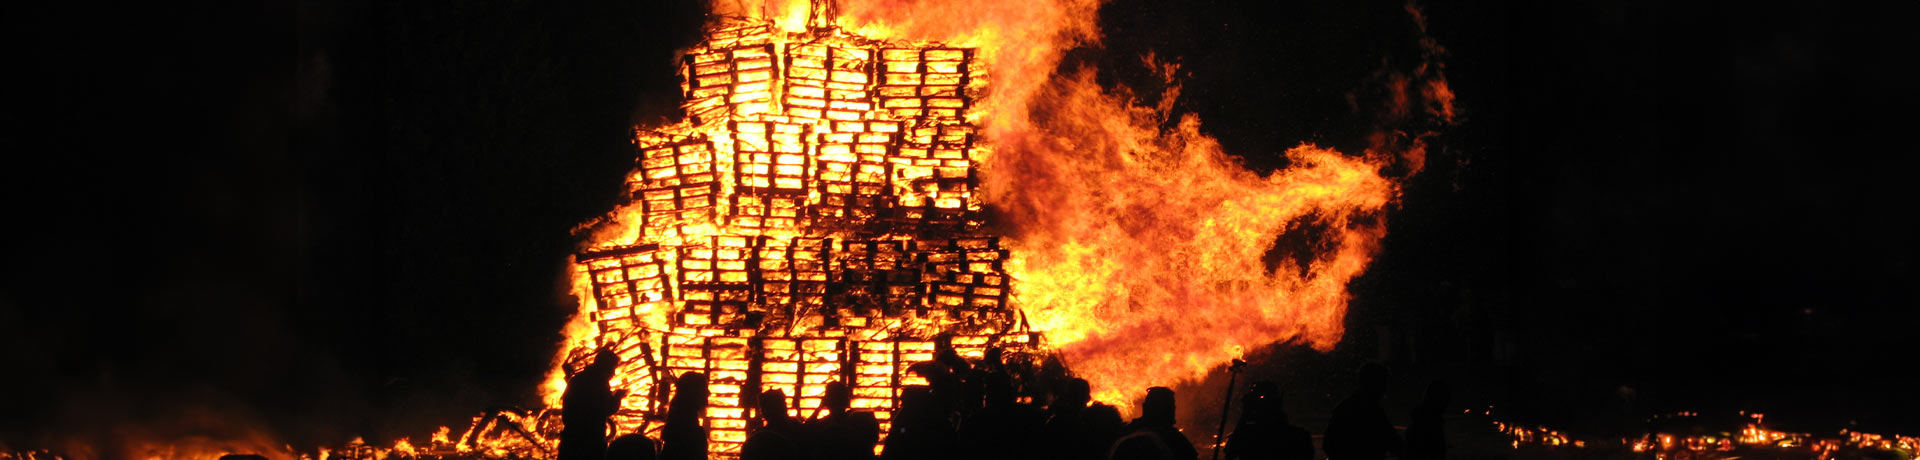 Guide to Lewes bonfire night